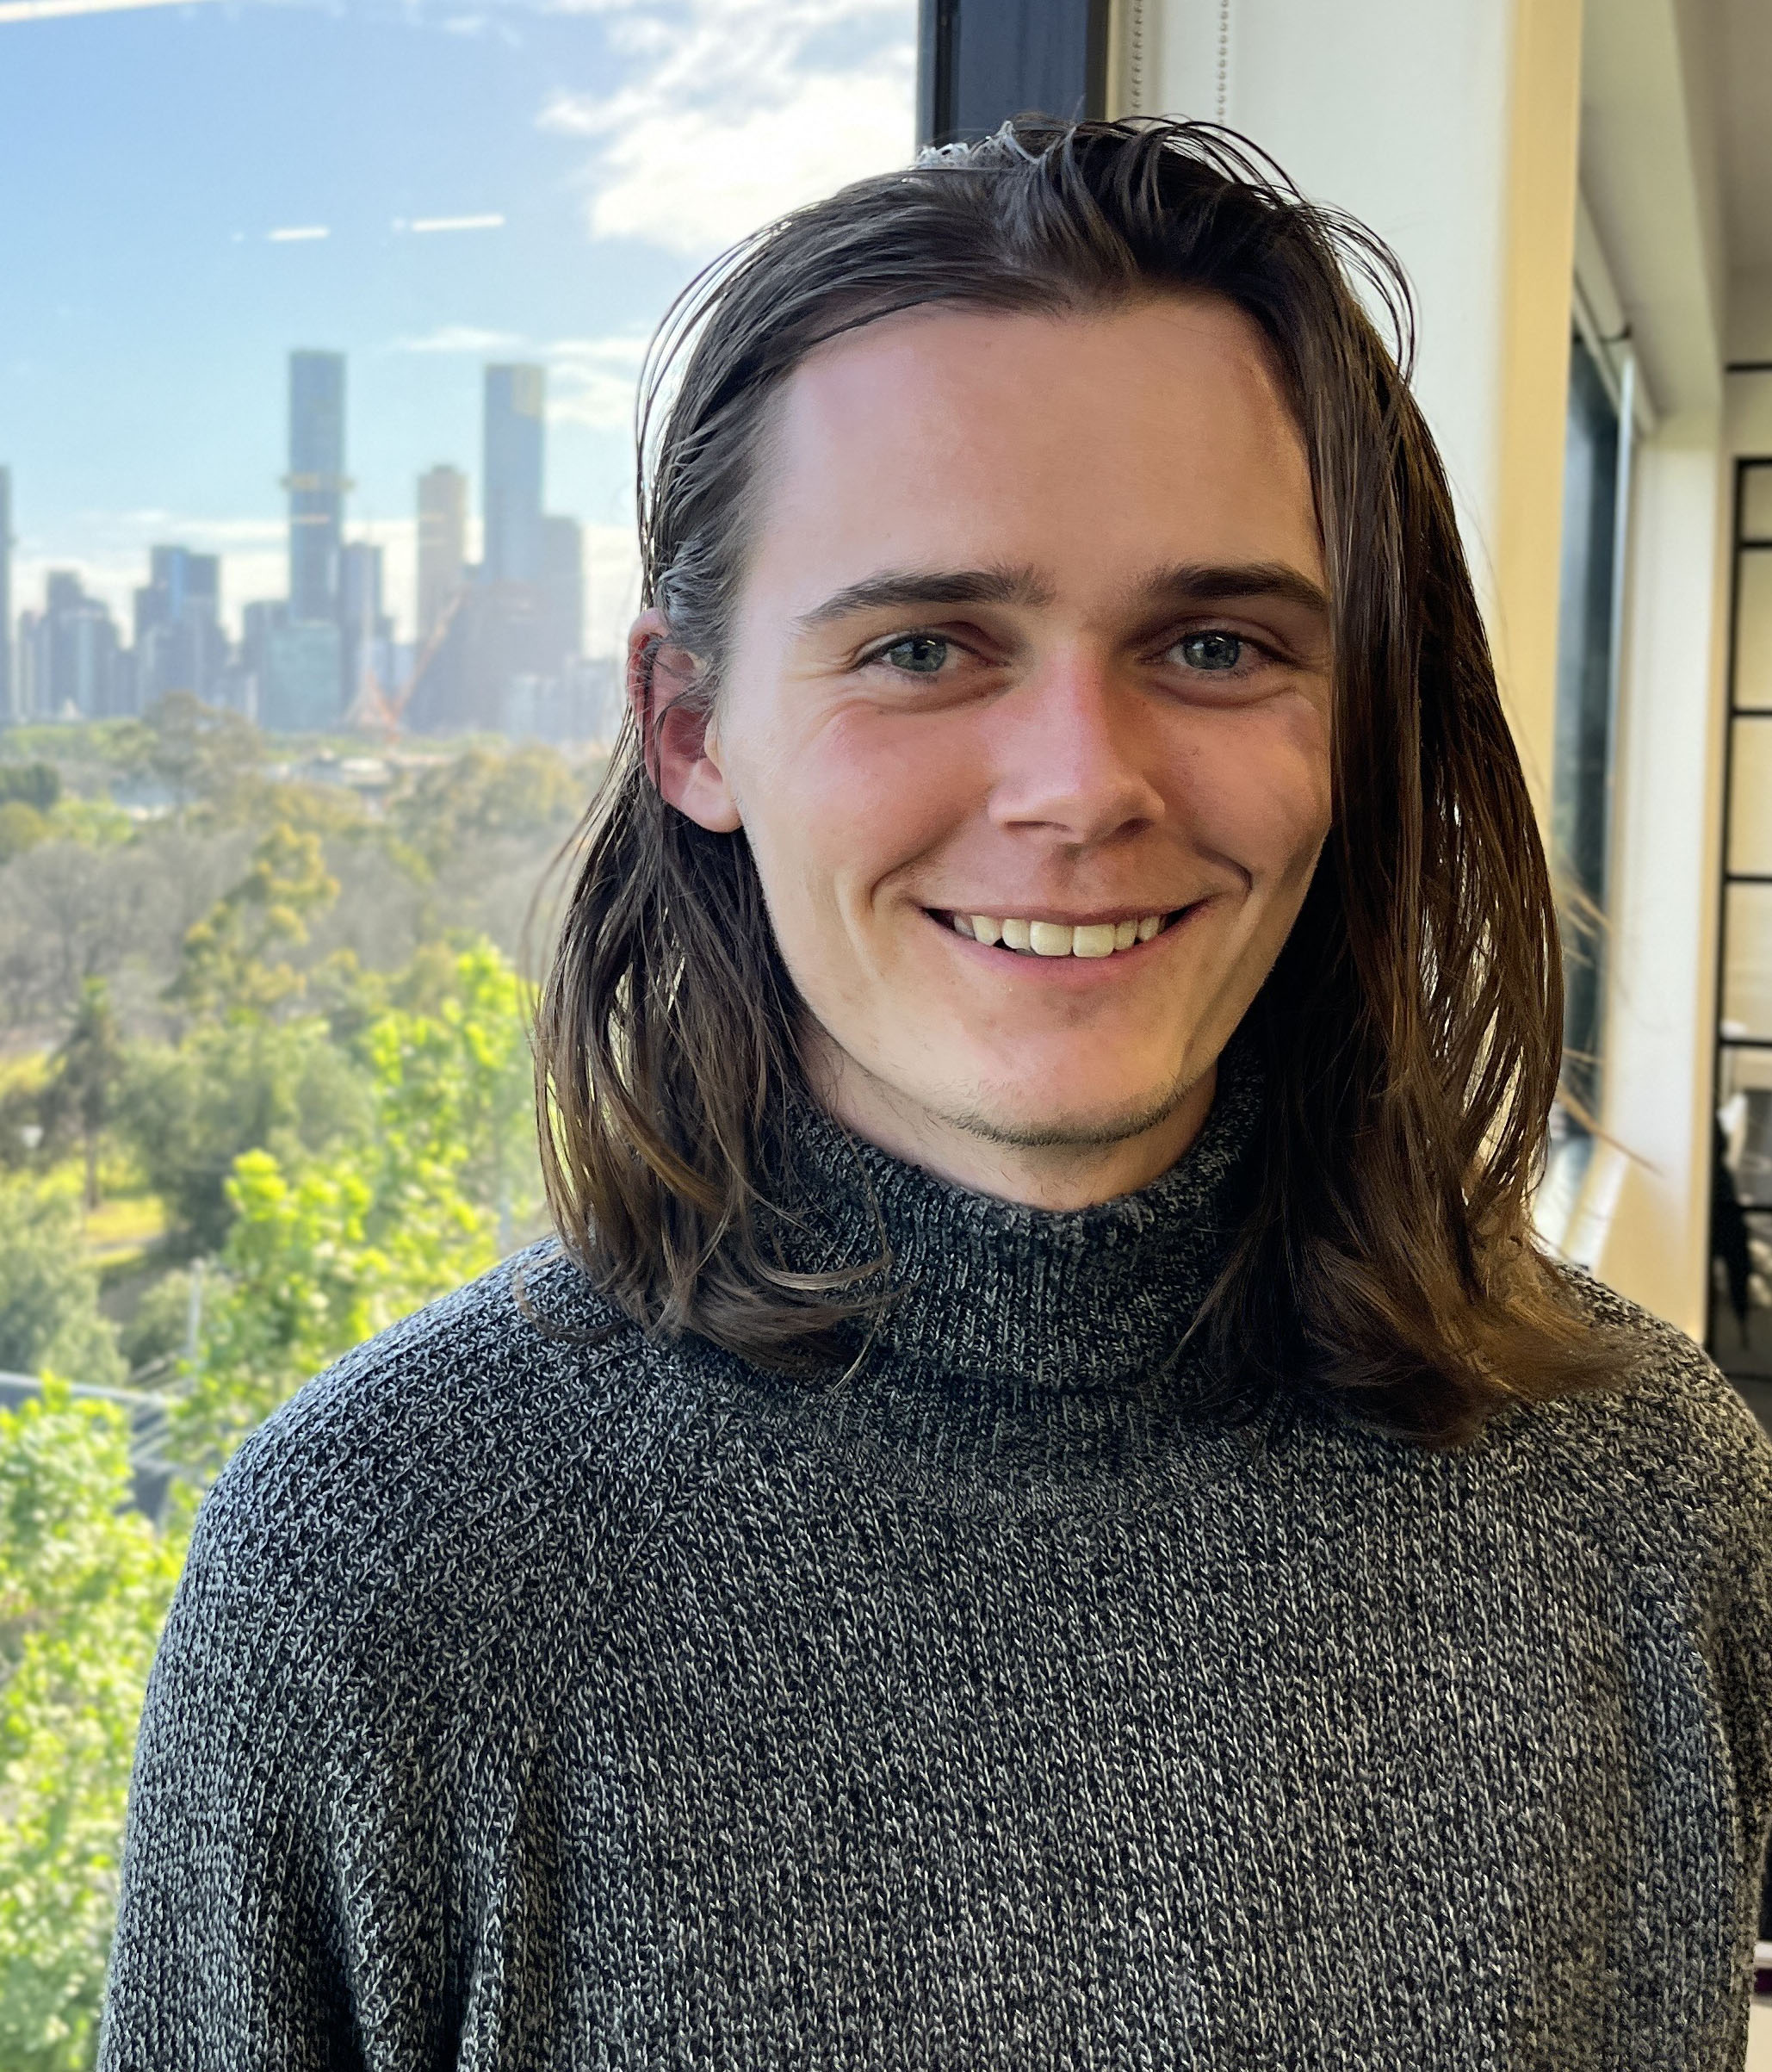 Jerome Des Preaux, a young man, smiles at the camera. He has shoulder length brown hair and is wearing a dark grey turtleneck jumper. He is standing in front of a window with a city scape and gardens behind him.